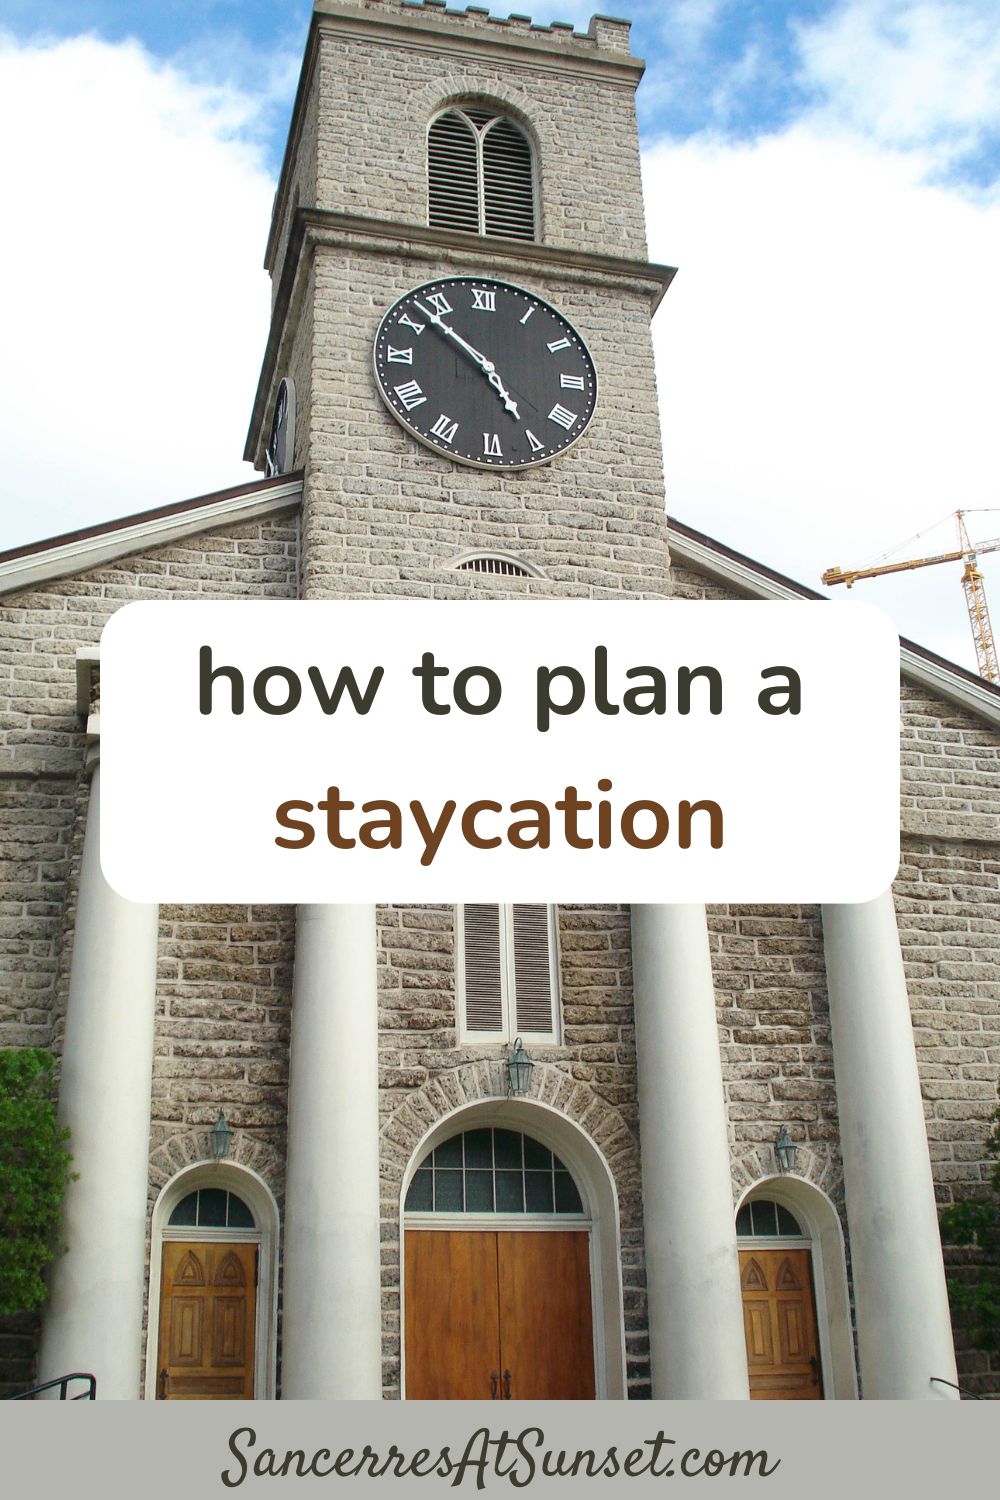 How to Plan a Staycation